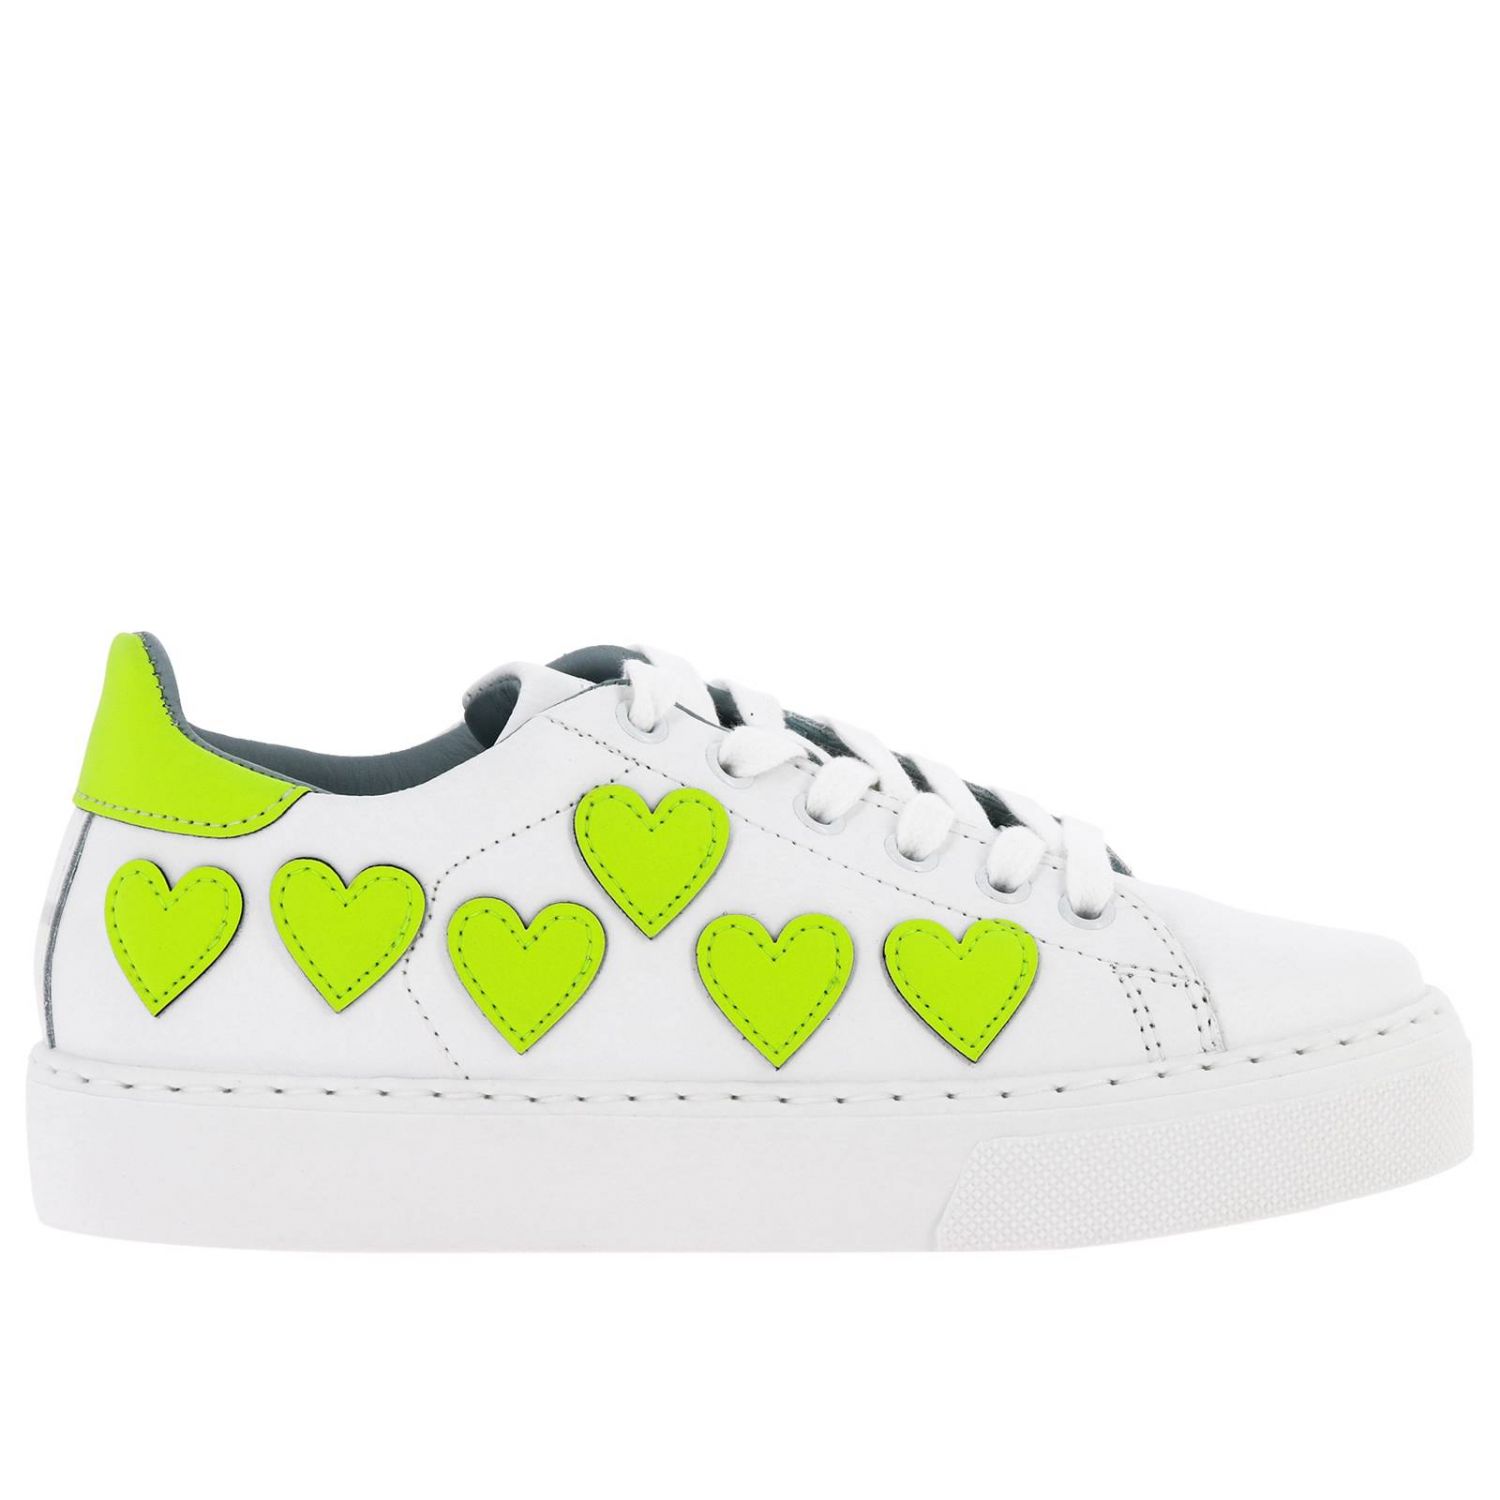 tennis shoes with hearts on them